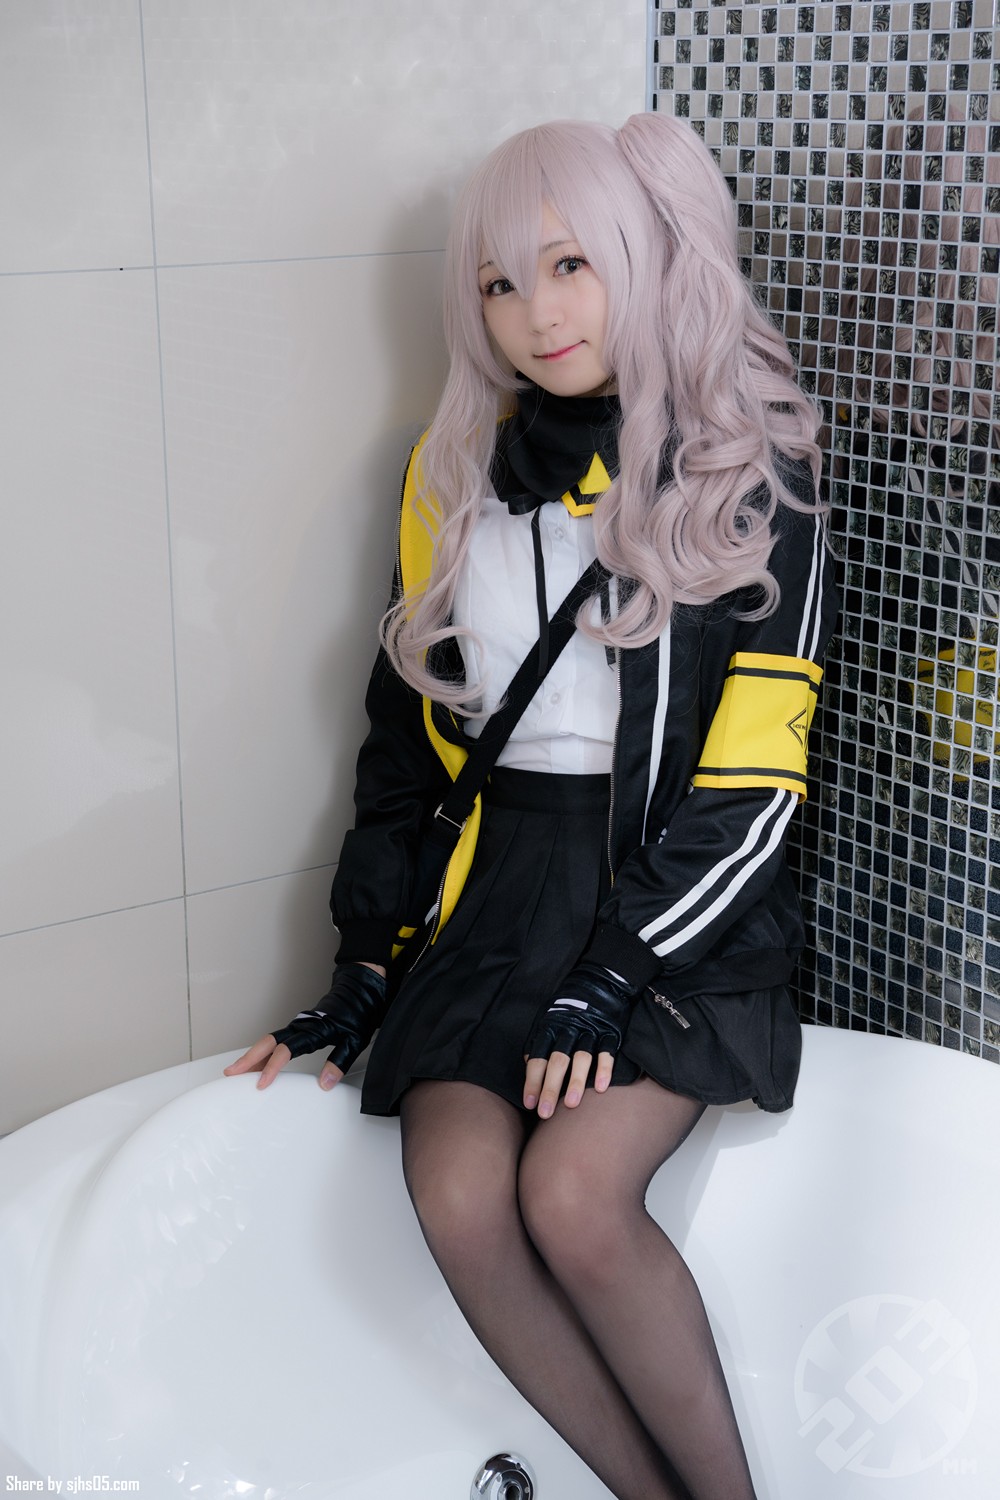 [taicho malice] Tokuno! Glossy lotion slimy (the Girl's Frontline part) - COSPLAY -